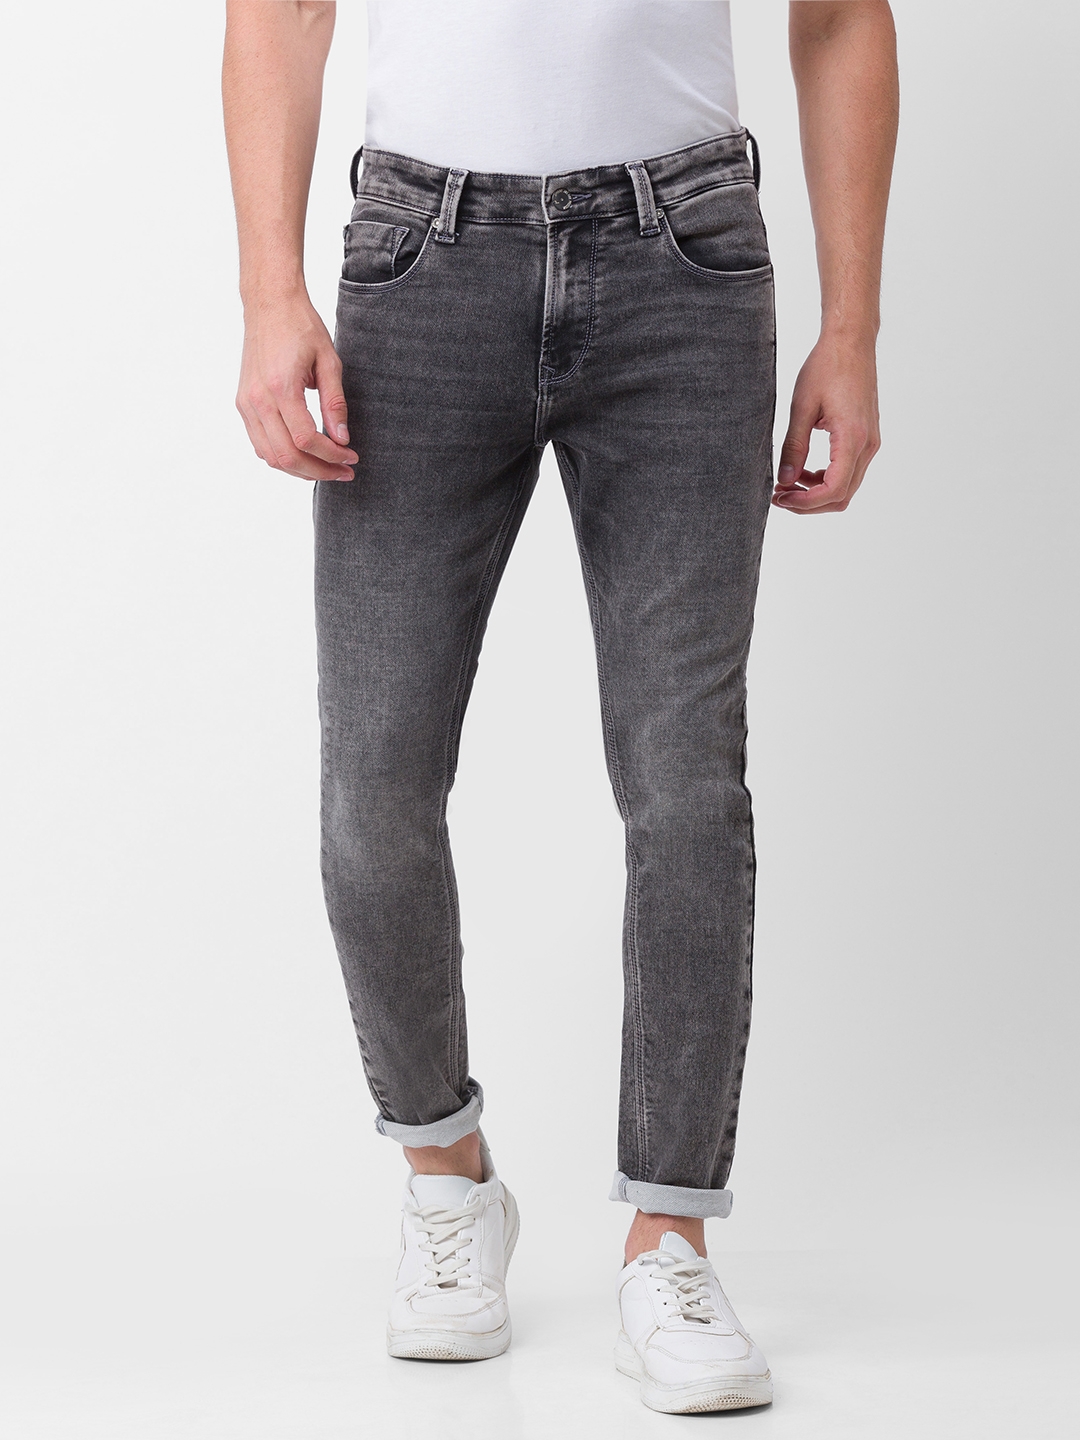 Spykar | Spykar Charcoal Grey Cotton Slim Fit Tapered Length Jeans For Men (Kano)